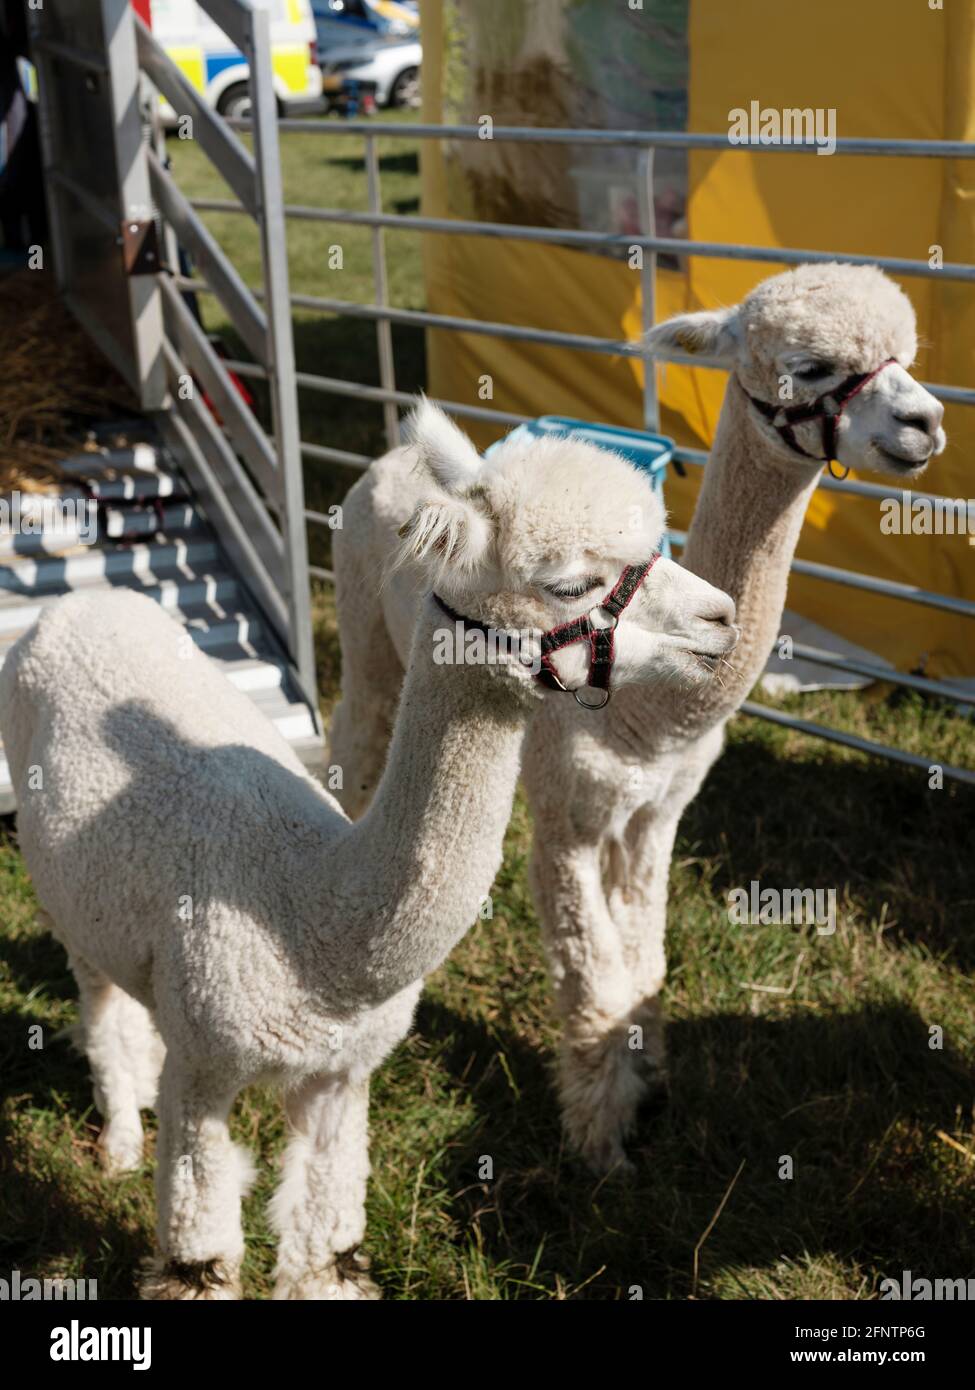 Alpacas at the Melplash Agricultural Society Show at the West Bay Show grounds, Bridport, Dorset, United Kingdom, August 22, 2019. Stock Photo